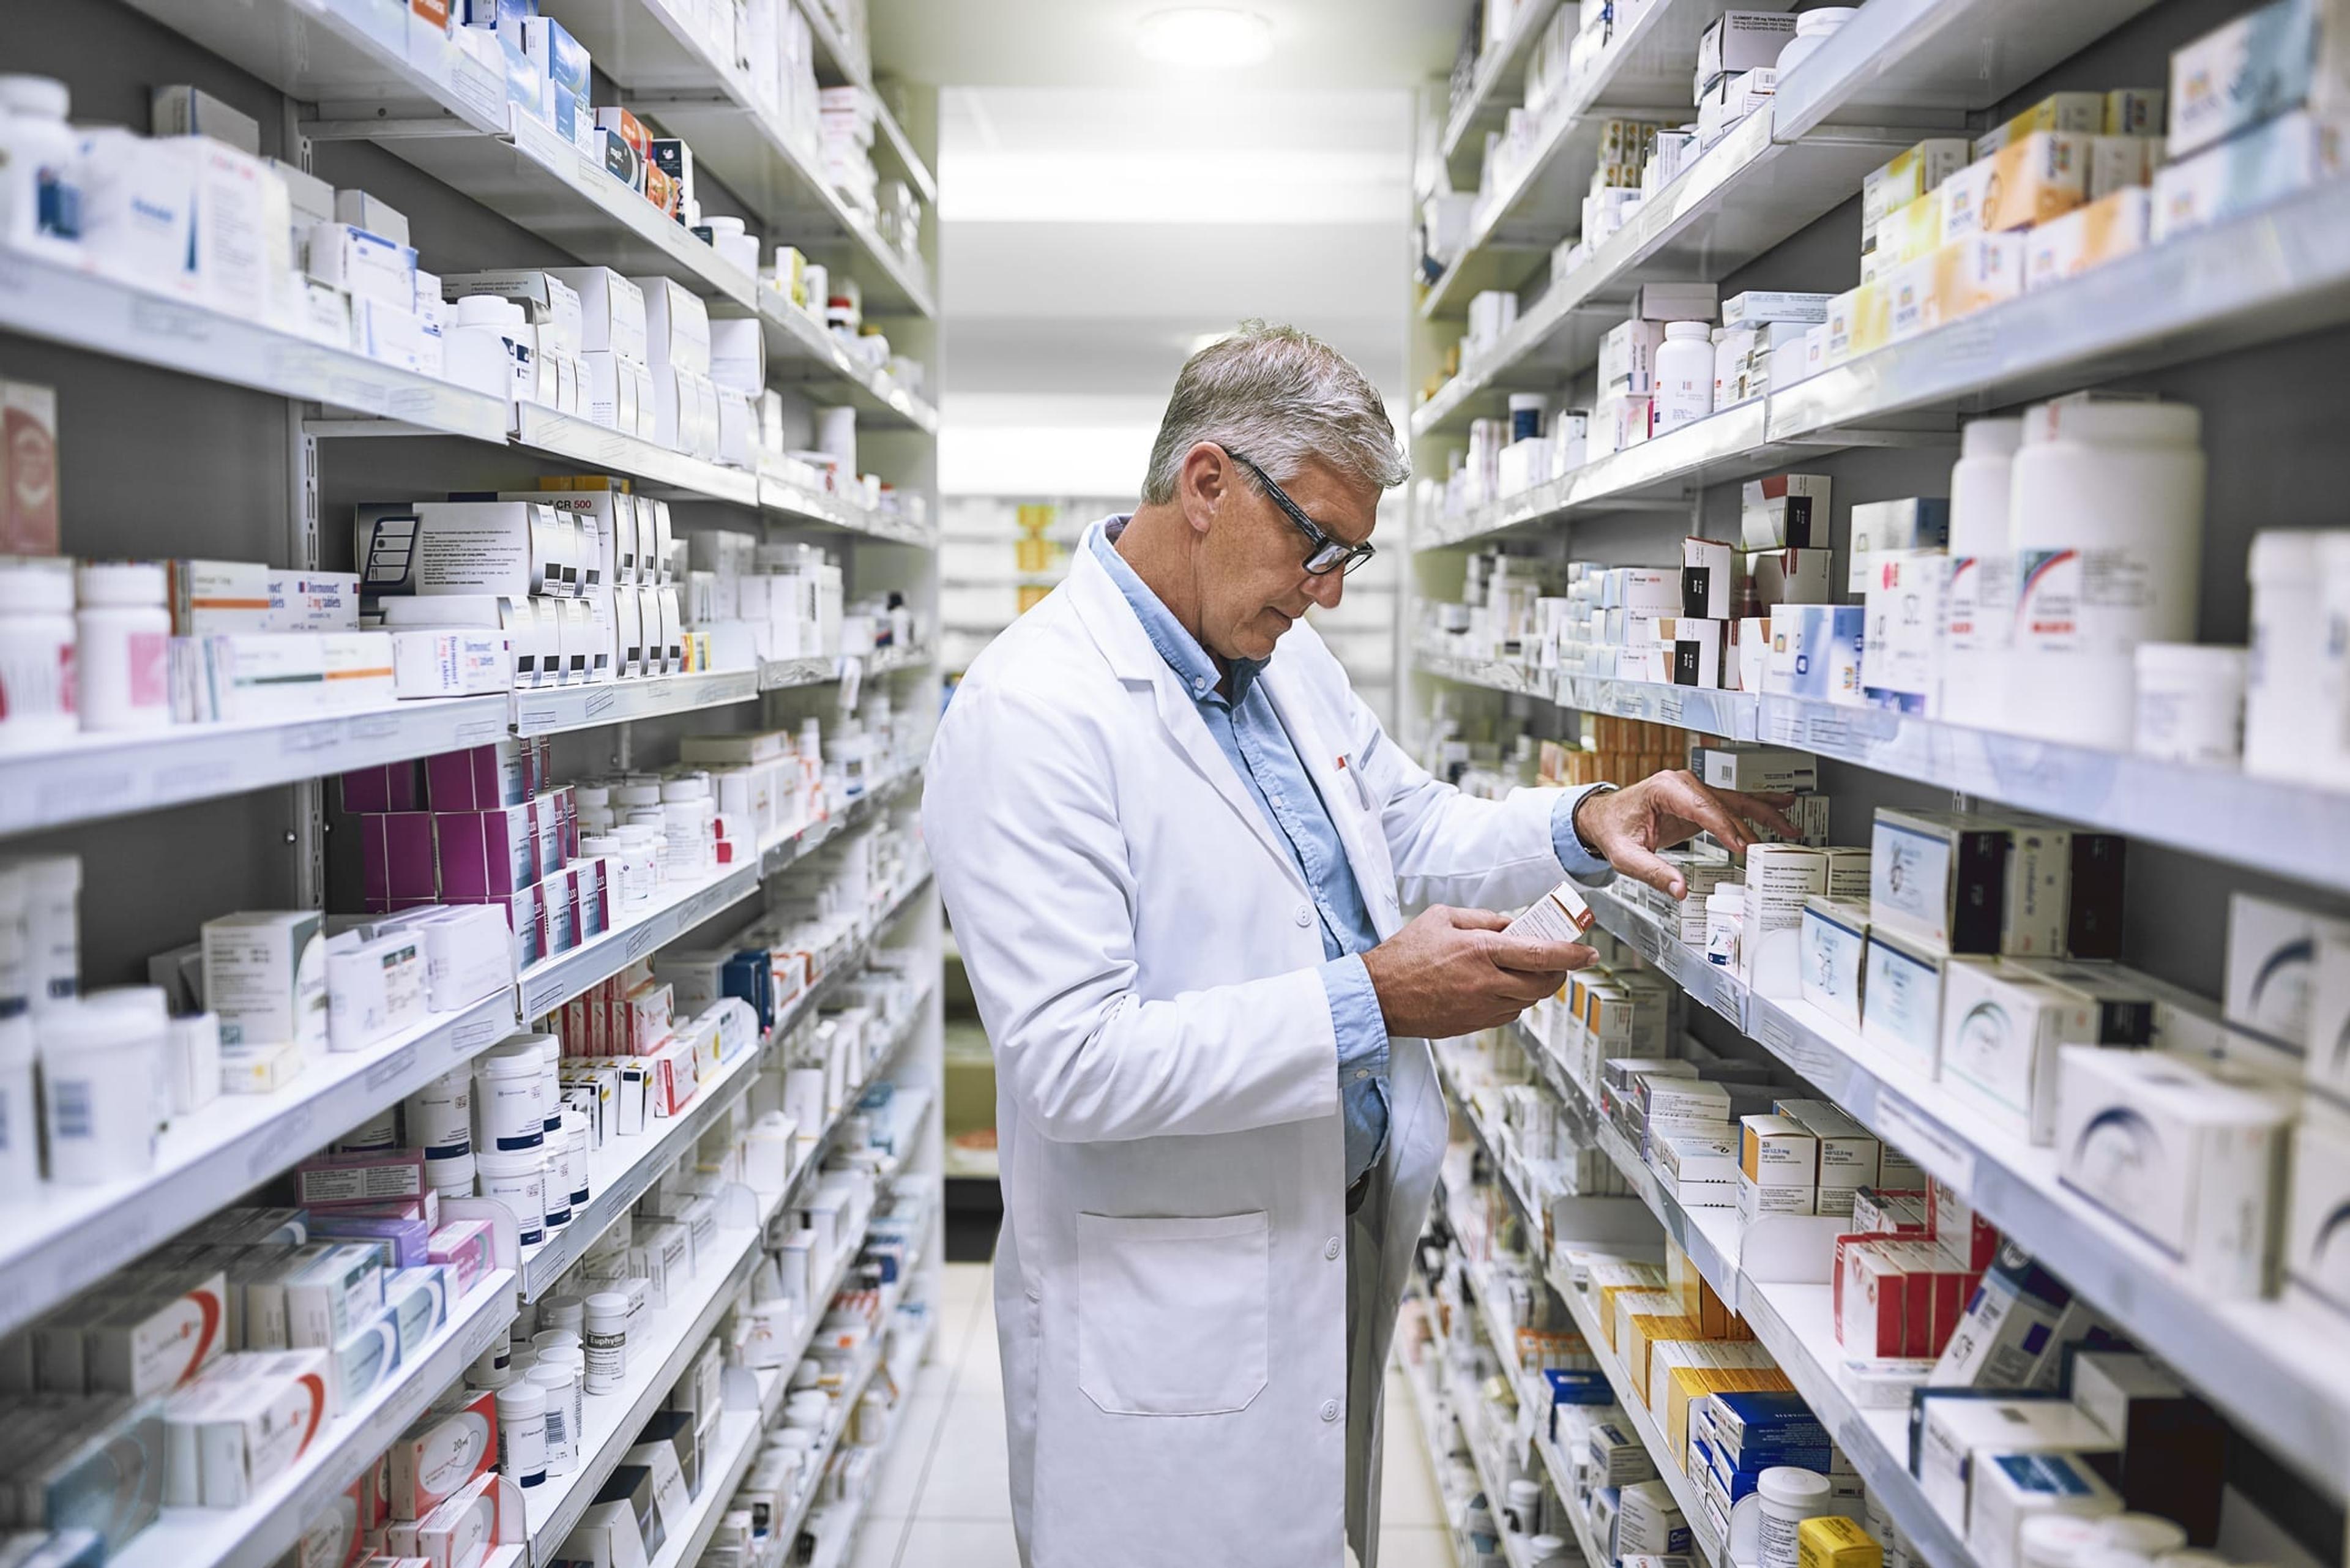 Male pharmacist makes notes on medication stock in a pharmacy